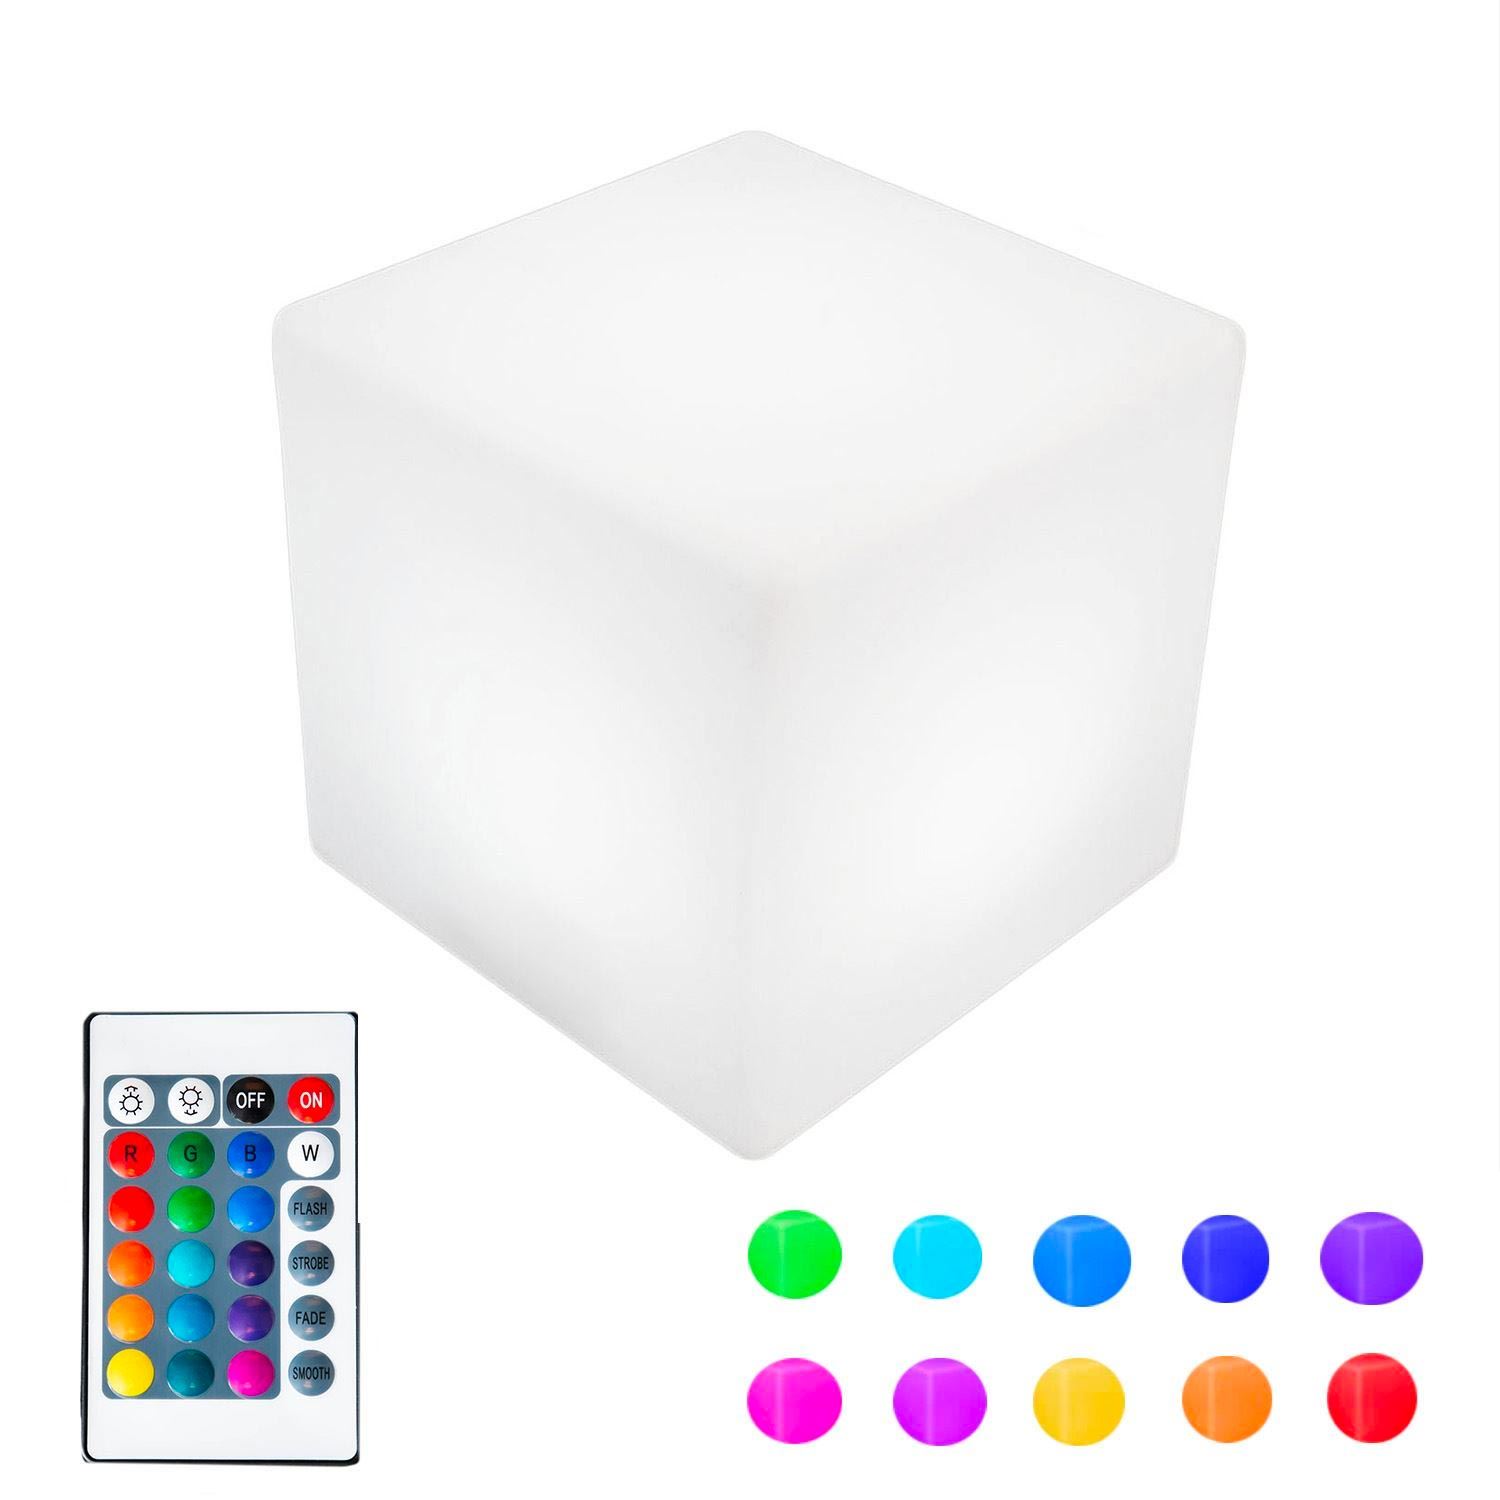 Novelty Lights 4" LED Plastic 3D Glow Cube Chair Light, Waterproof Rechargeable Color Changing Party Cube with Remote, Great for Home Patio Restaurant Lighting - image 1 of 2